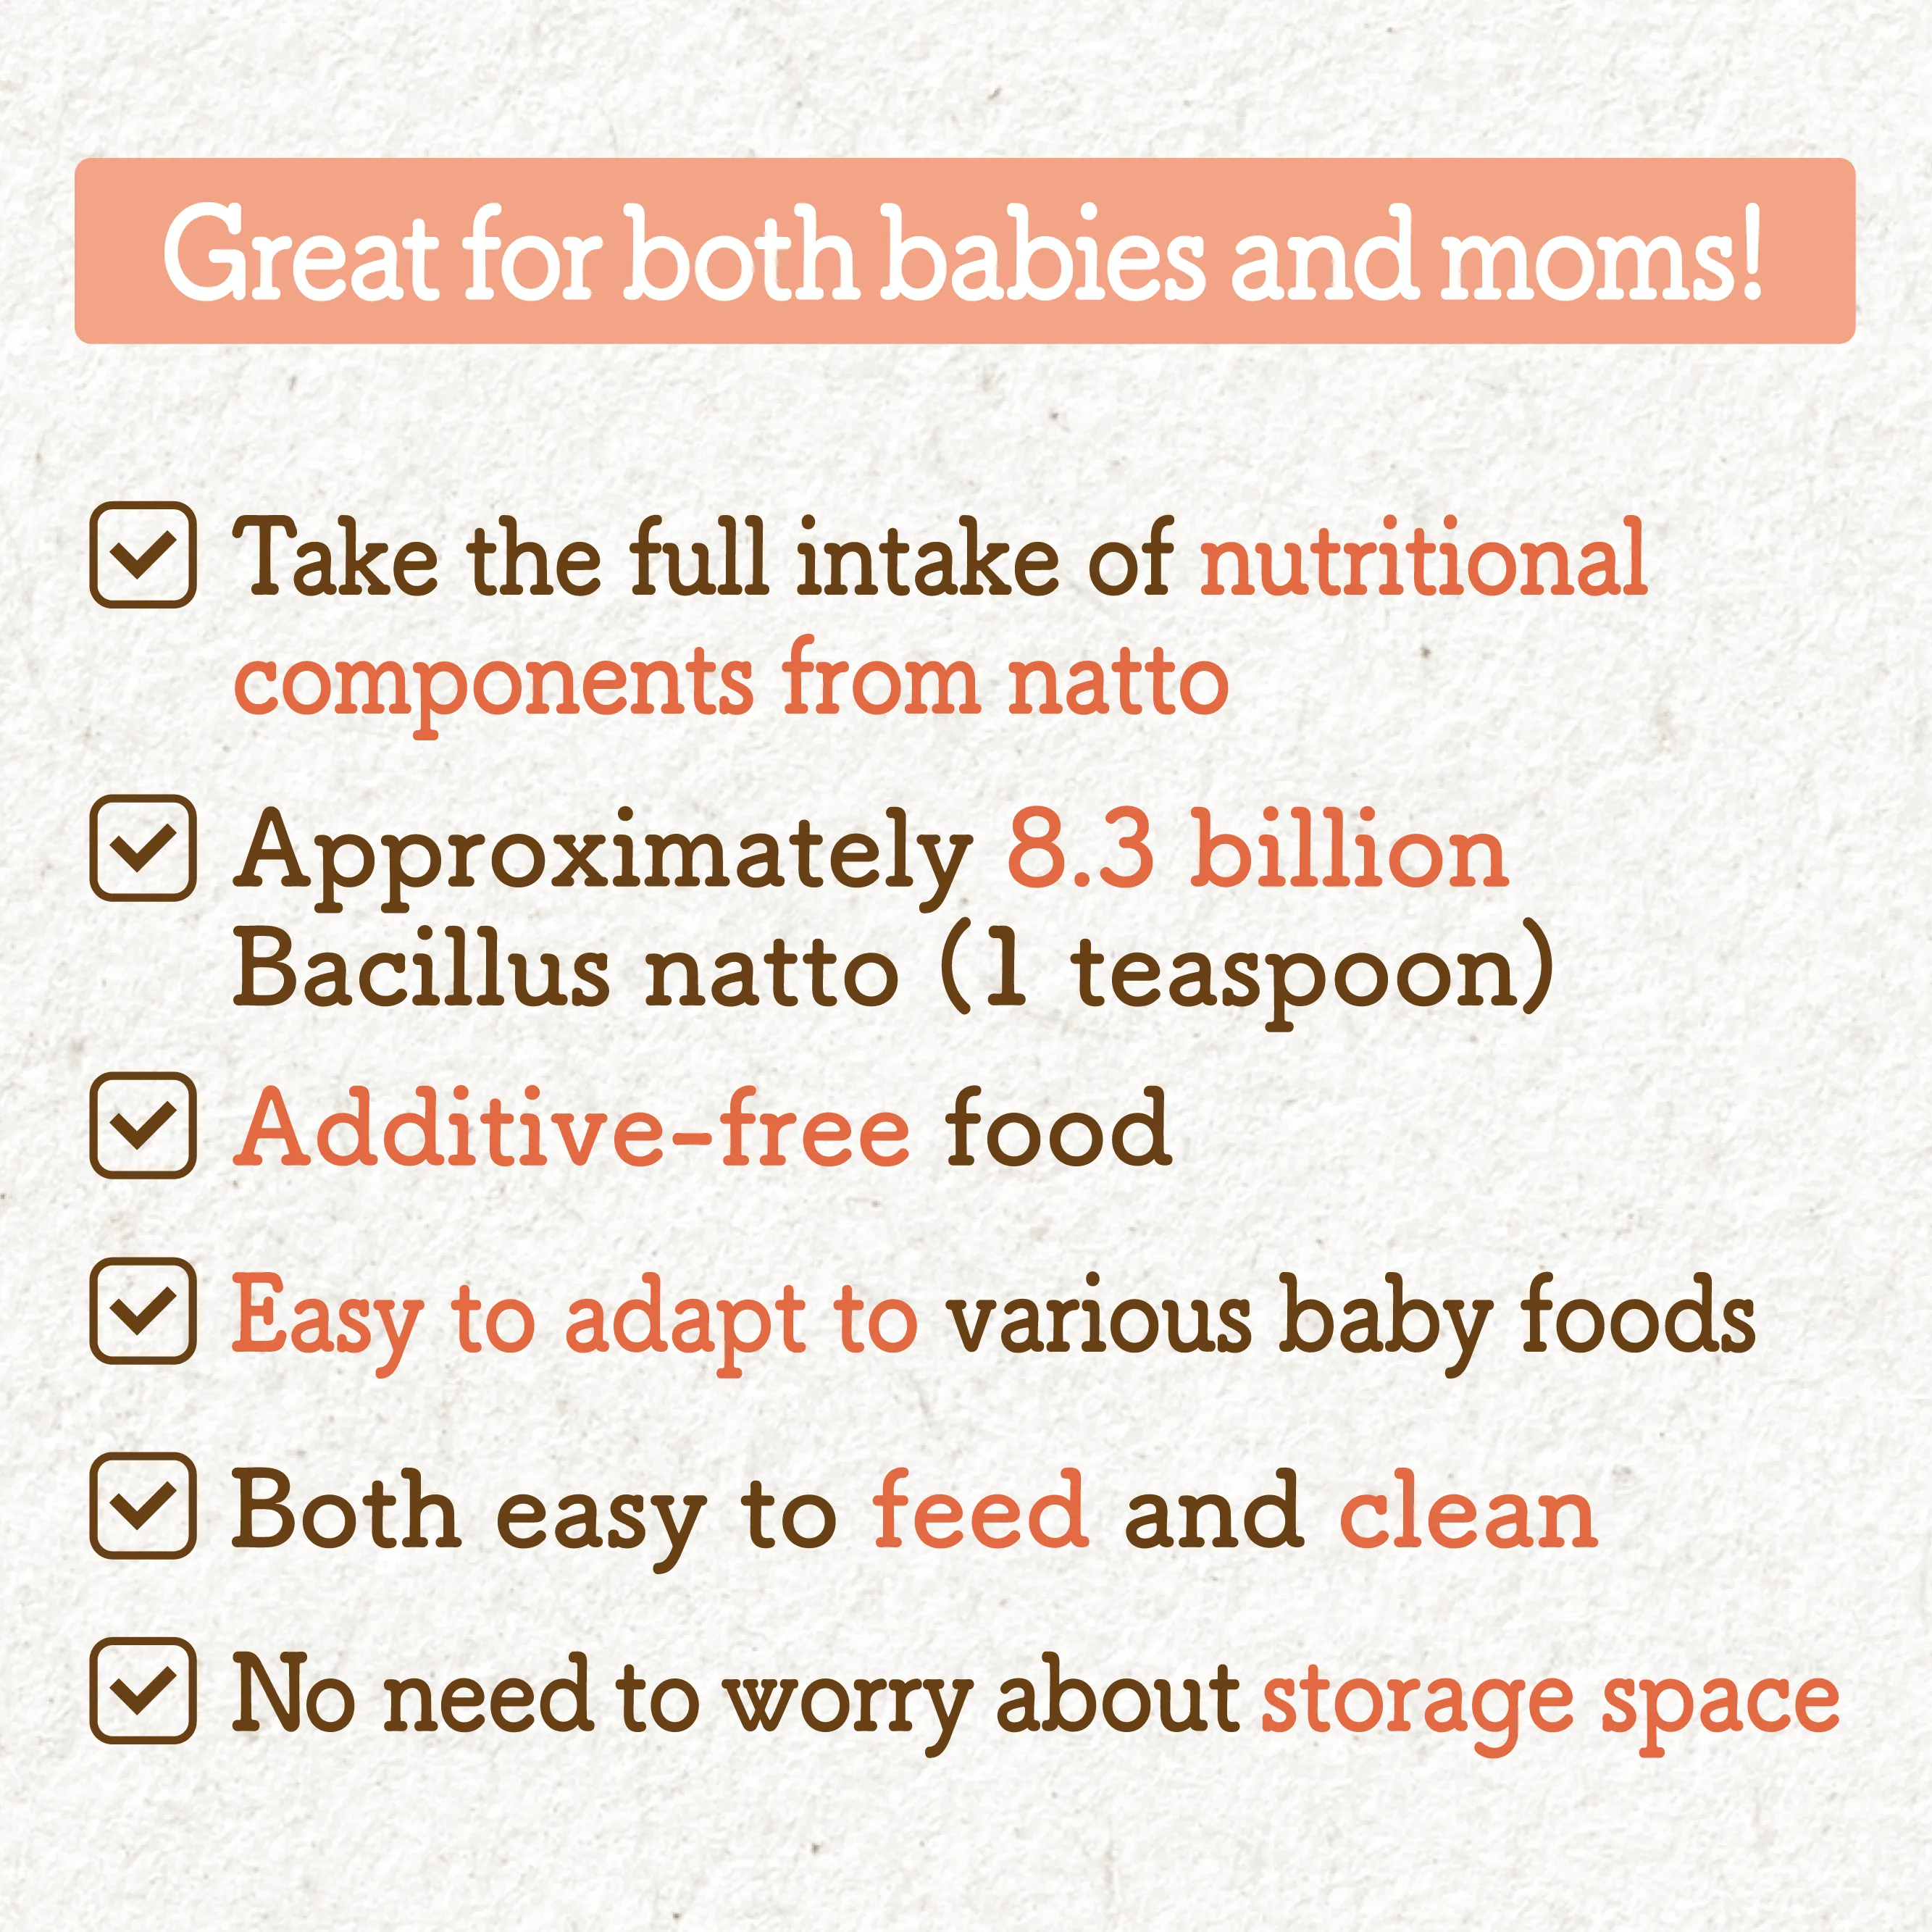 Achieves baby's nutrients and ease of eating